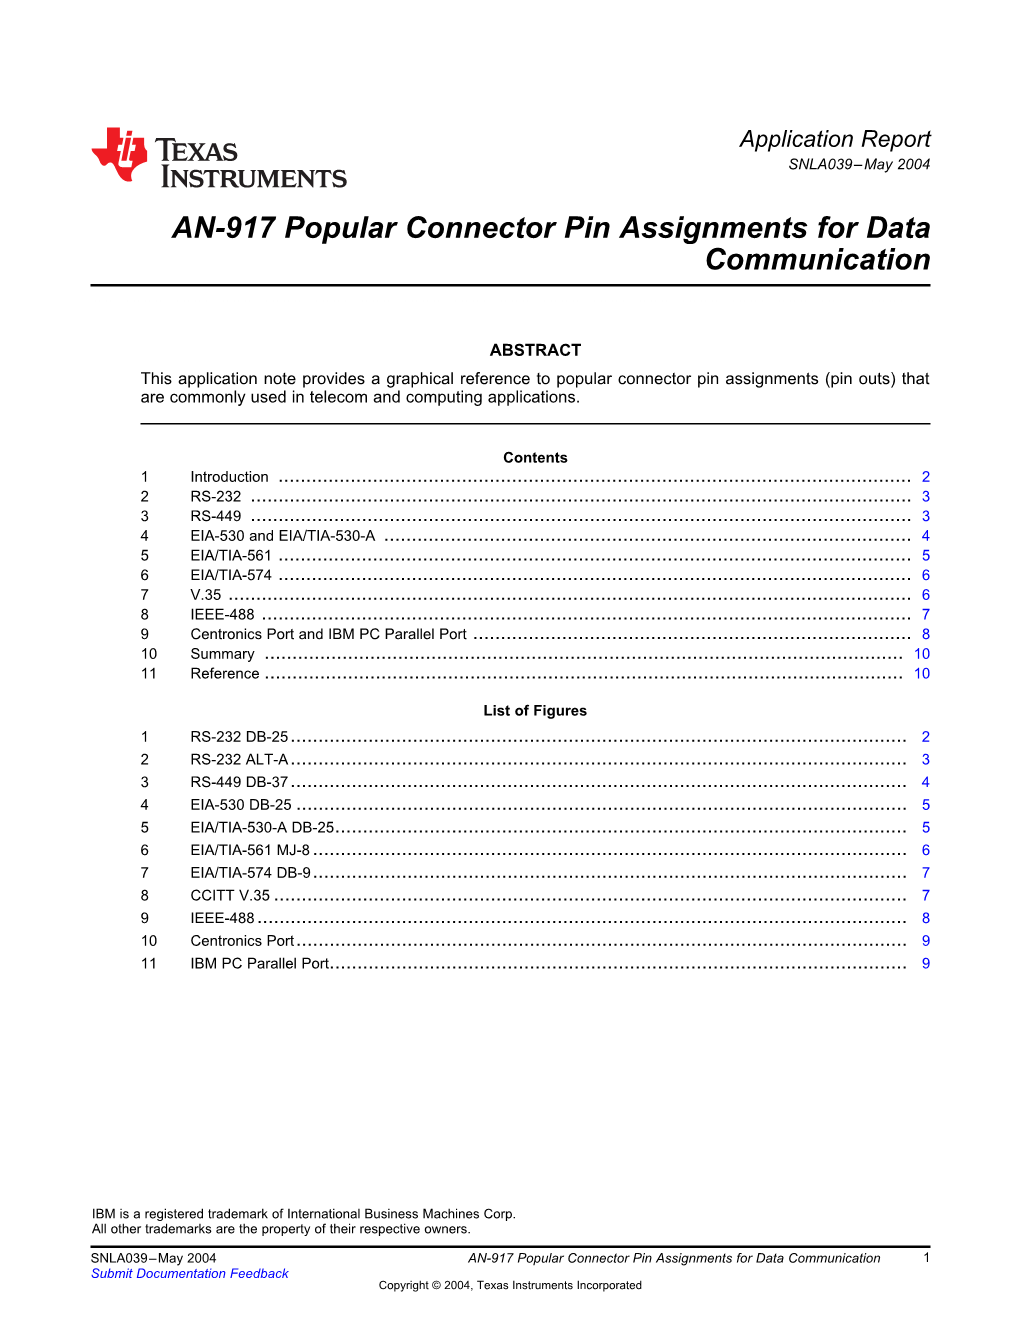 AN-917 Popular Connector Pin Assignments for Data Communication